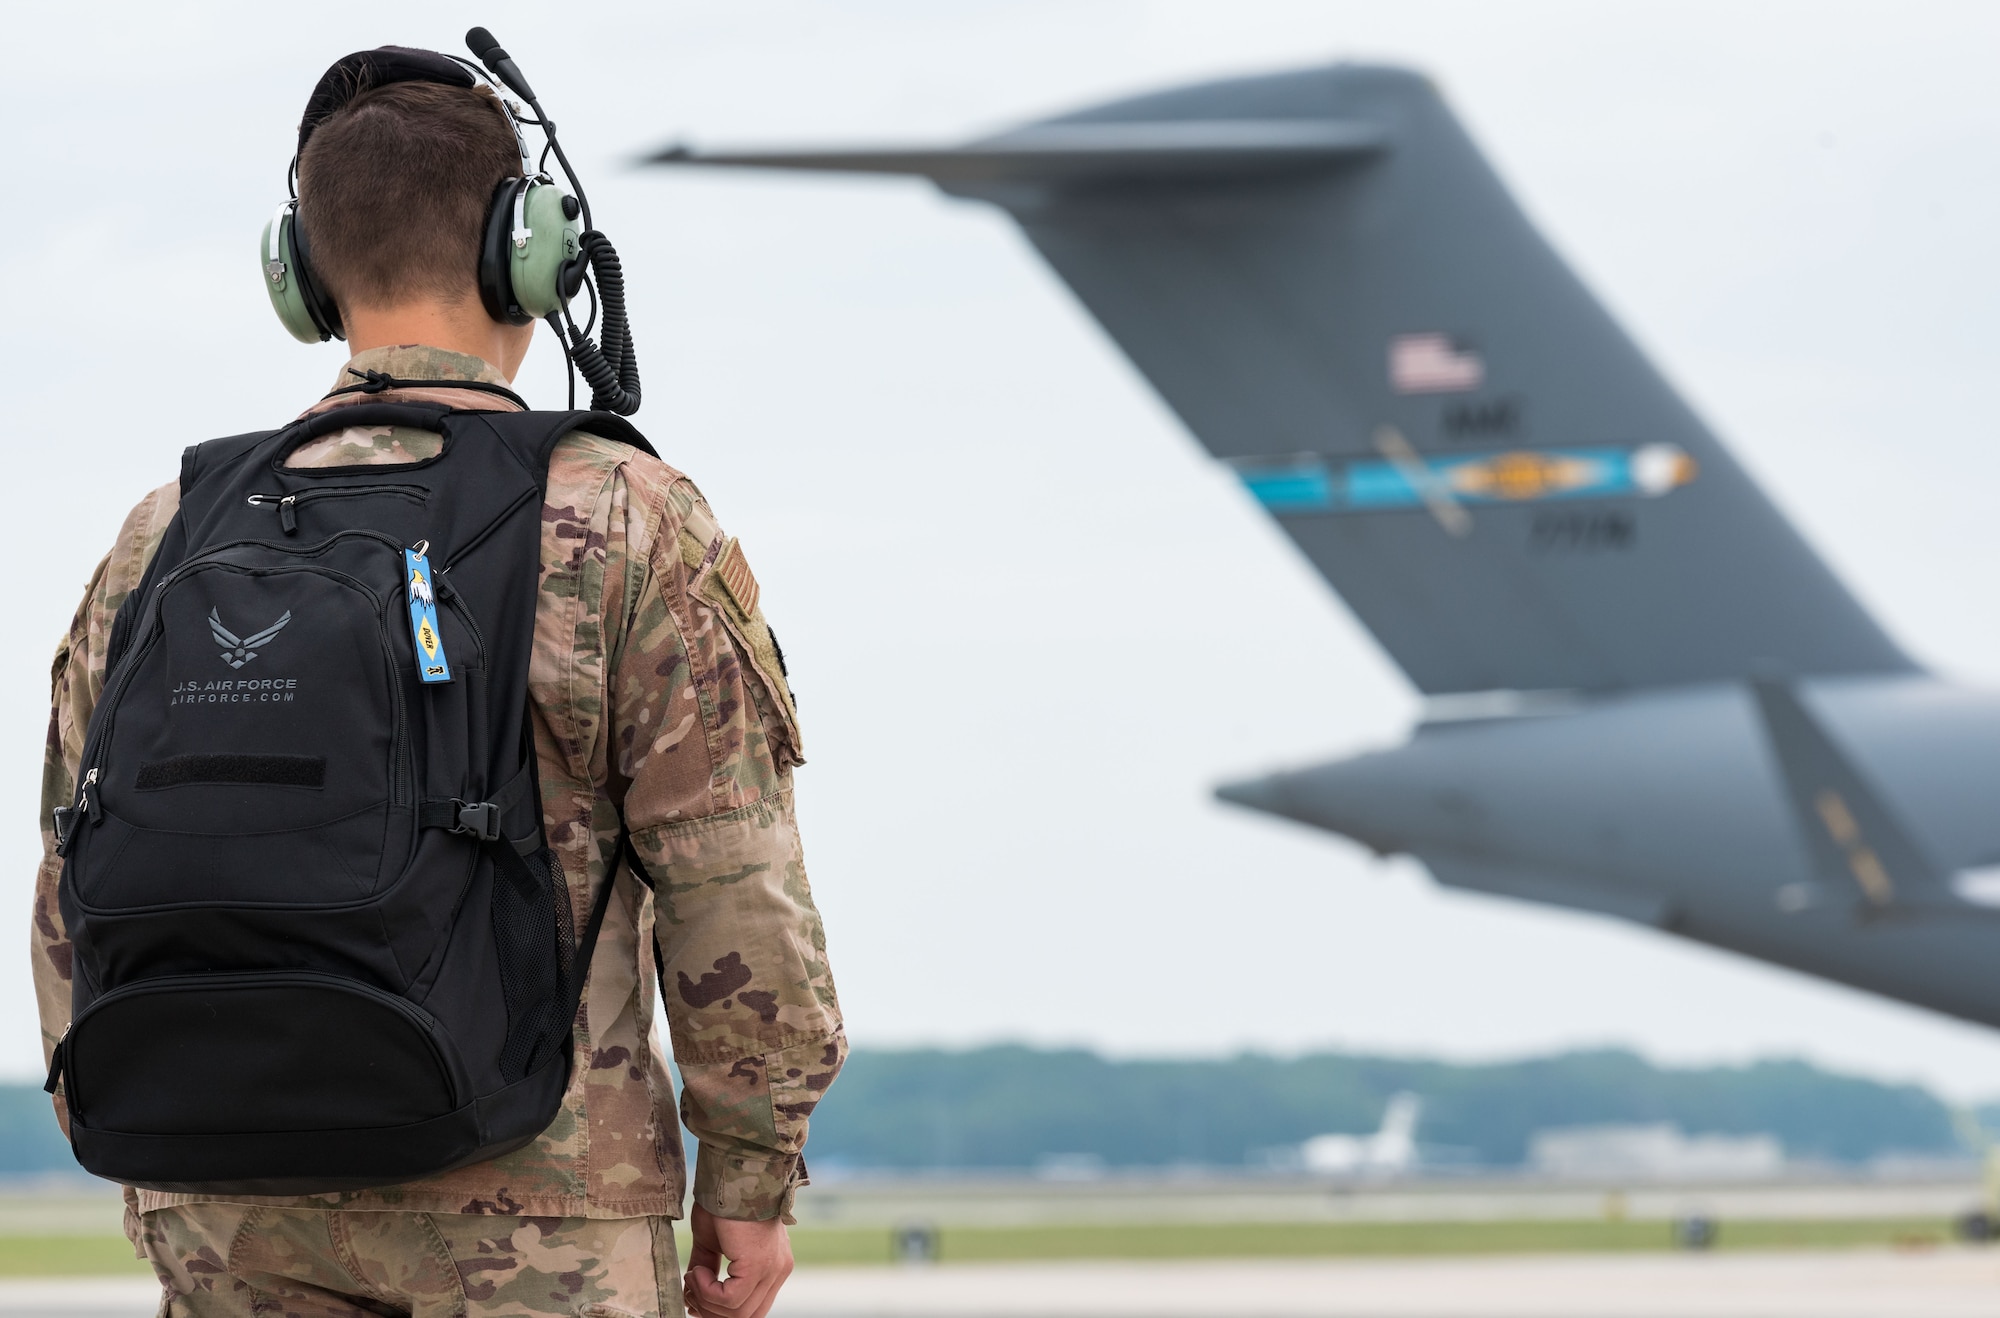 An Airman walks down the flight line carrying his backpack June 18, 2019, on Dover Air Force Base, Del. Metaphorically speaking, each of us may carry our personal backpacks filled with day-to-day struggles of life that are not visible to our Wingmen, family members and others. For Dover Airmen or family members in need of help, visit https://www.dover.af.mil/-We-Care-Guide/. (U.S. Air Force photo by Roland Balik)